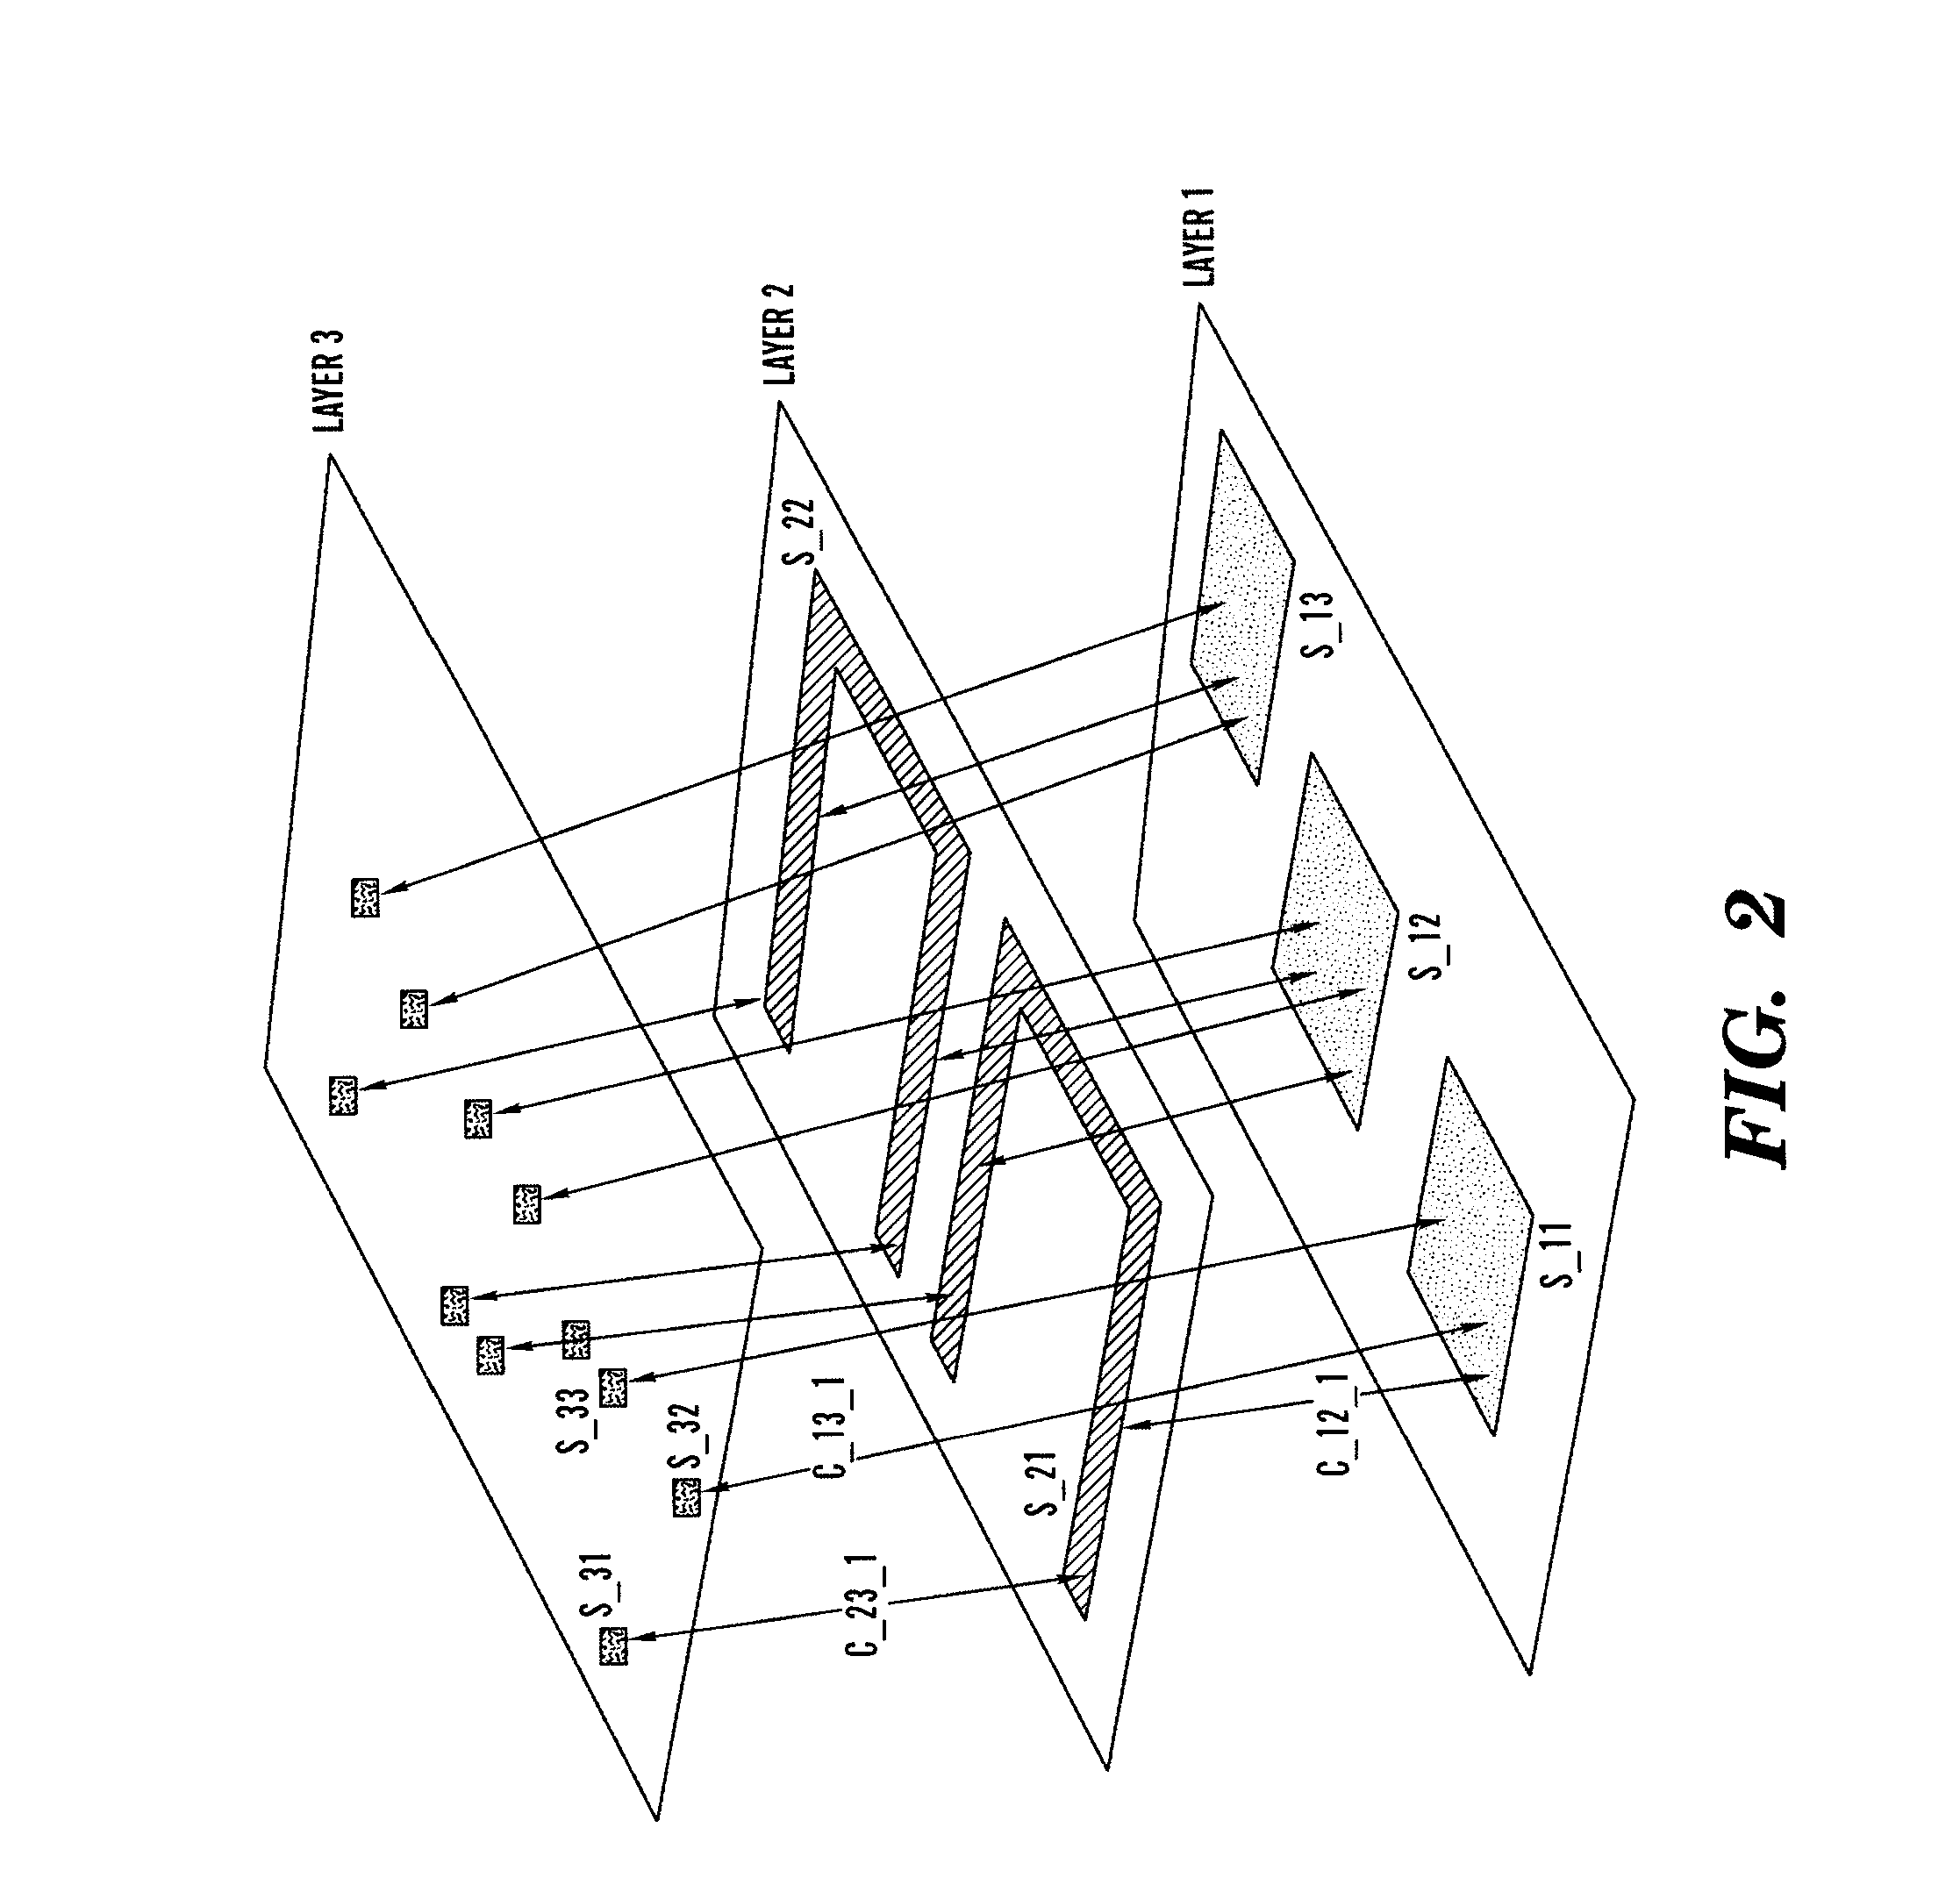 Multilayer OPC for Design Aware Manufacturing